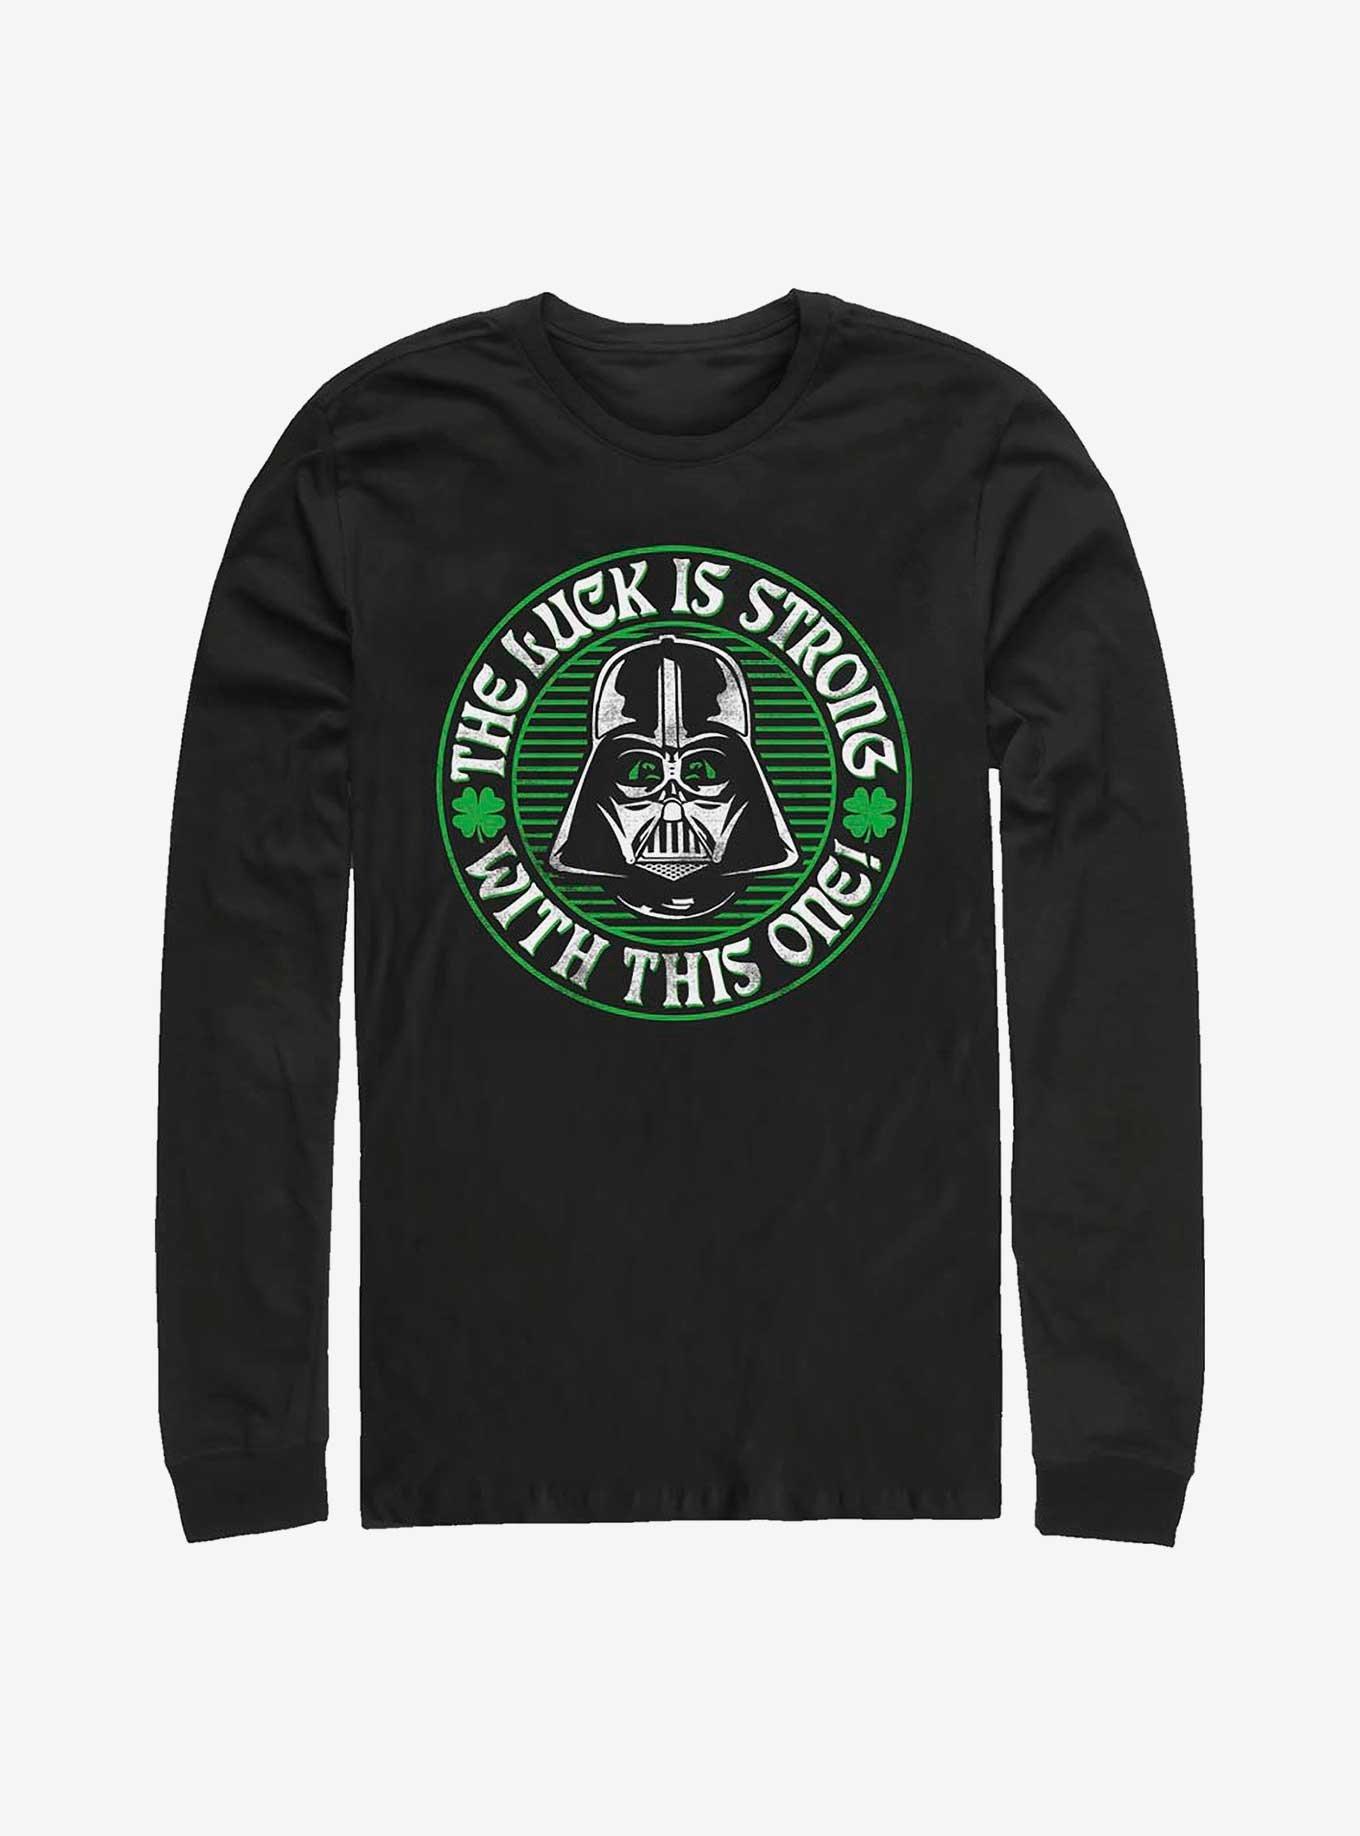 Star Wars Luck Is Strong Long-Sleeve T-Shirt, BLACK, hi-res